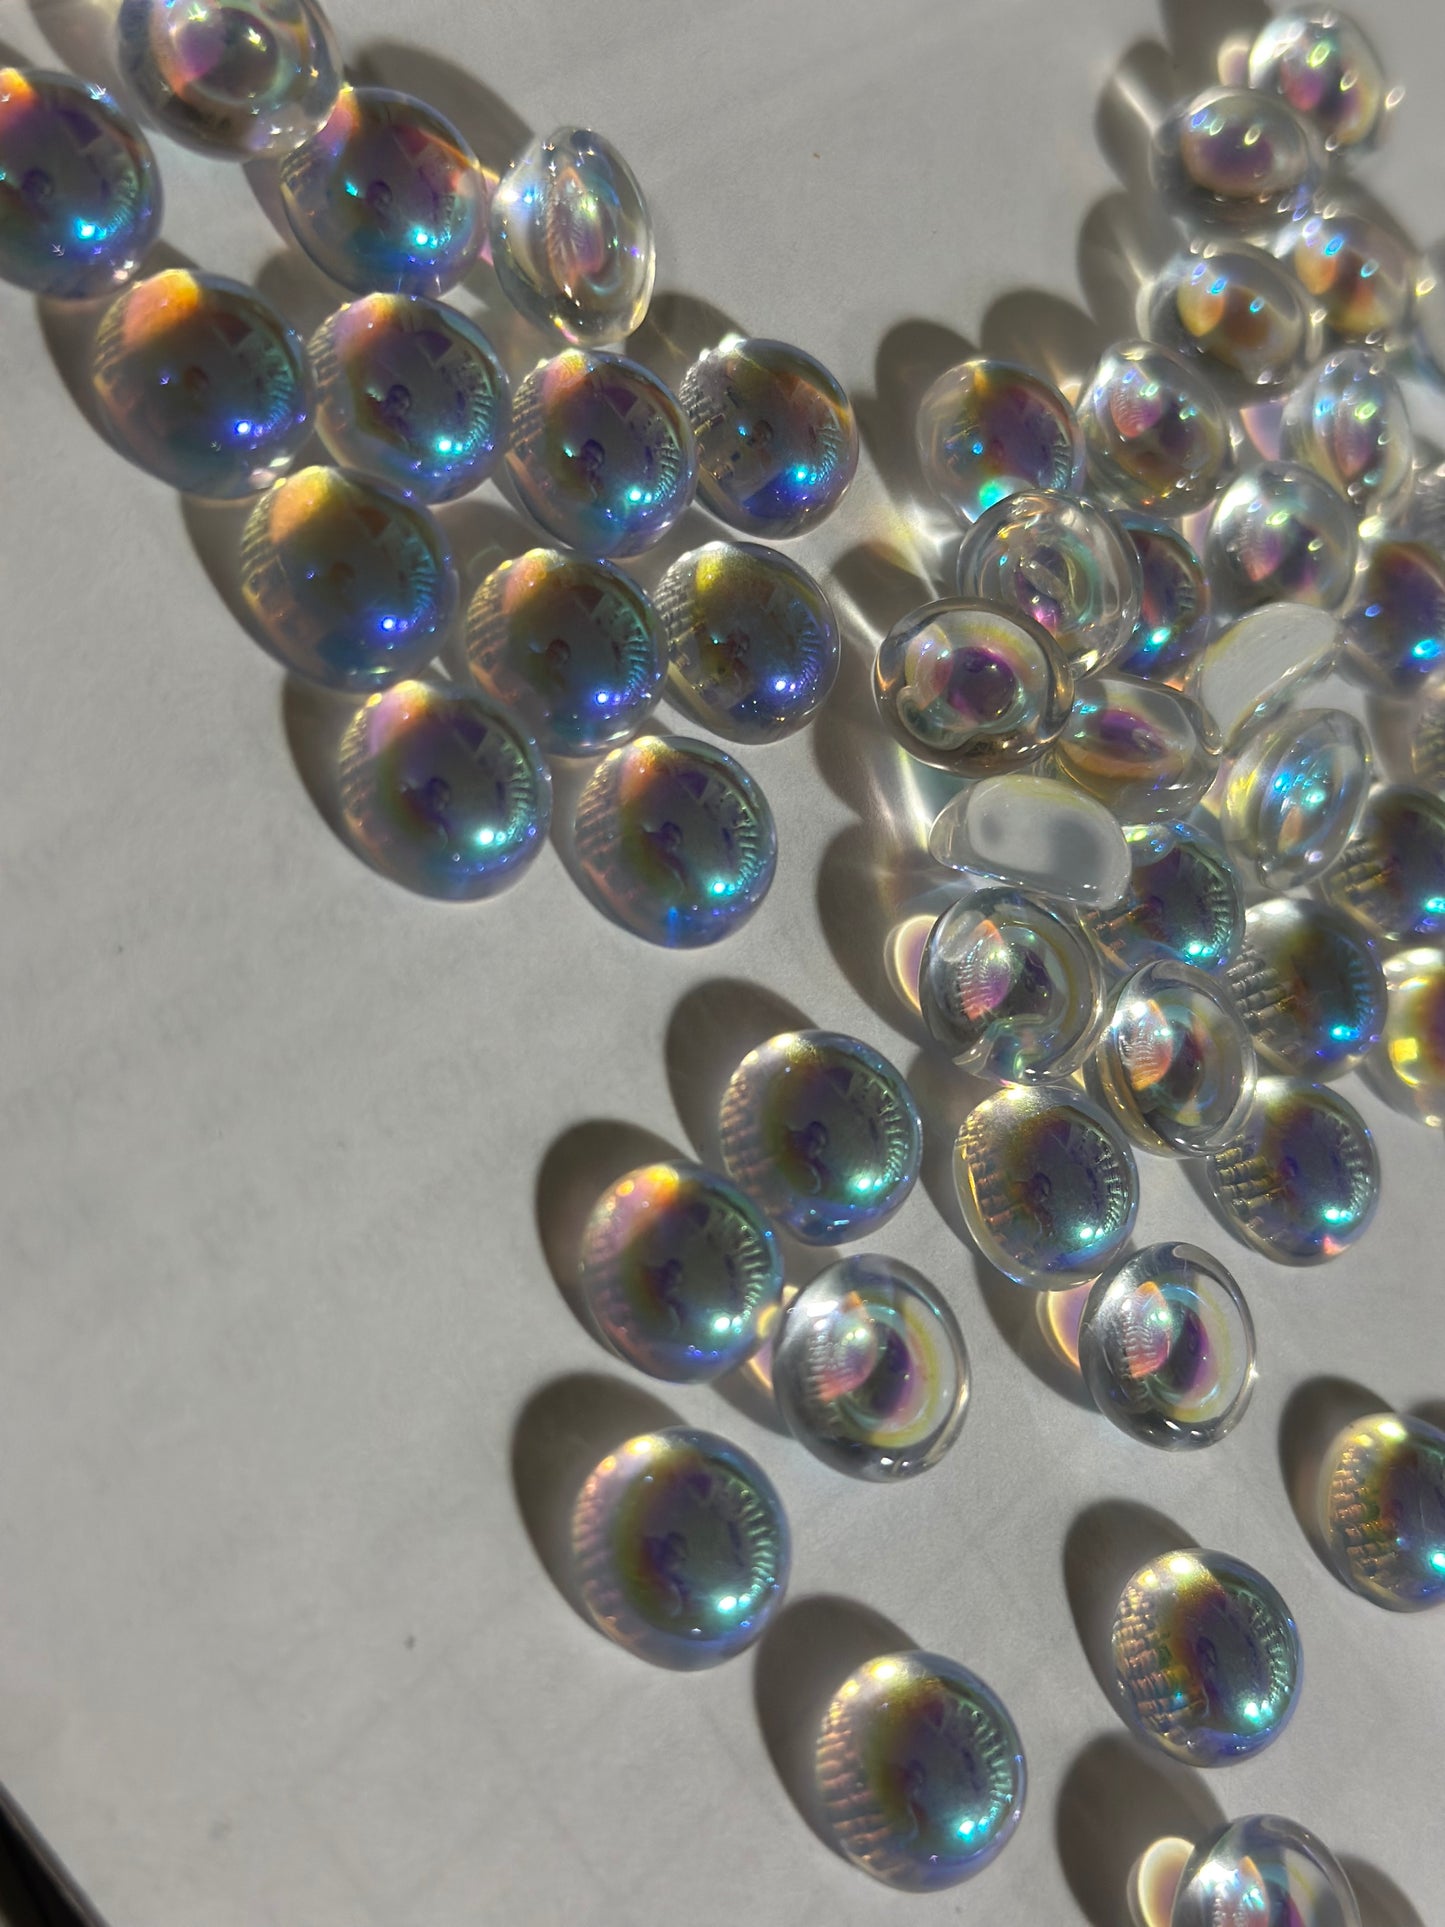 12mm Smooth Flat Back Jewel - Trichroic Iridescence - In Stock to Quickly Ship